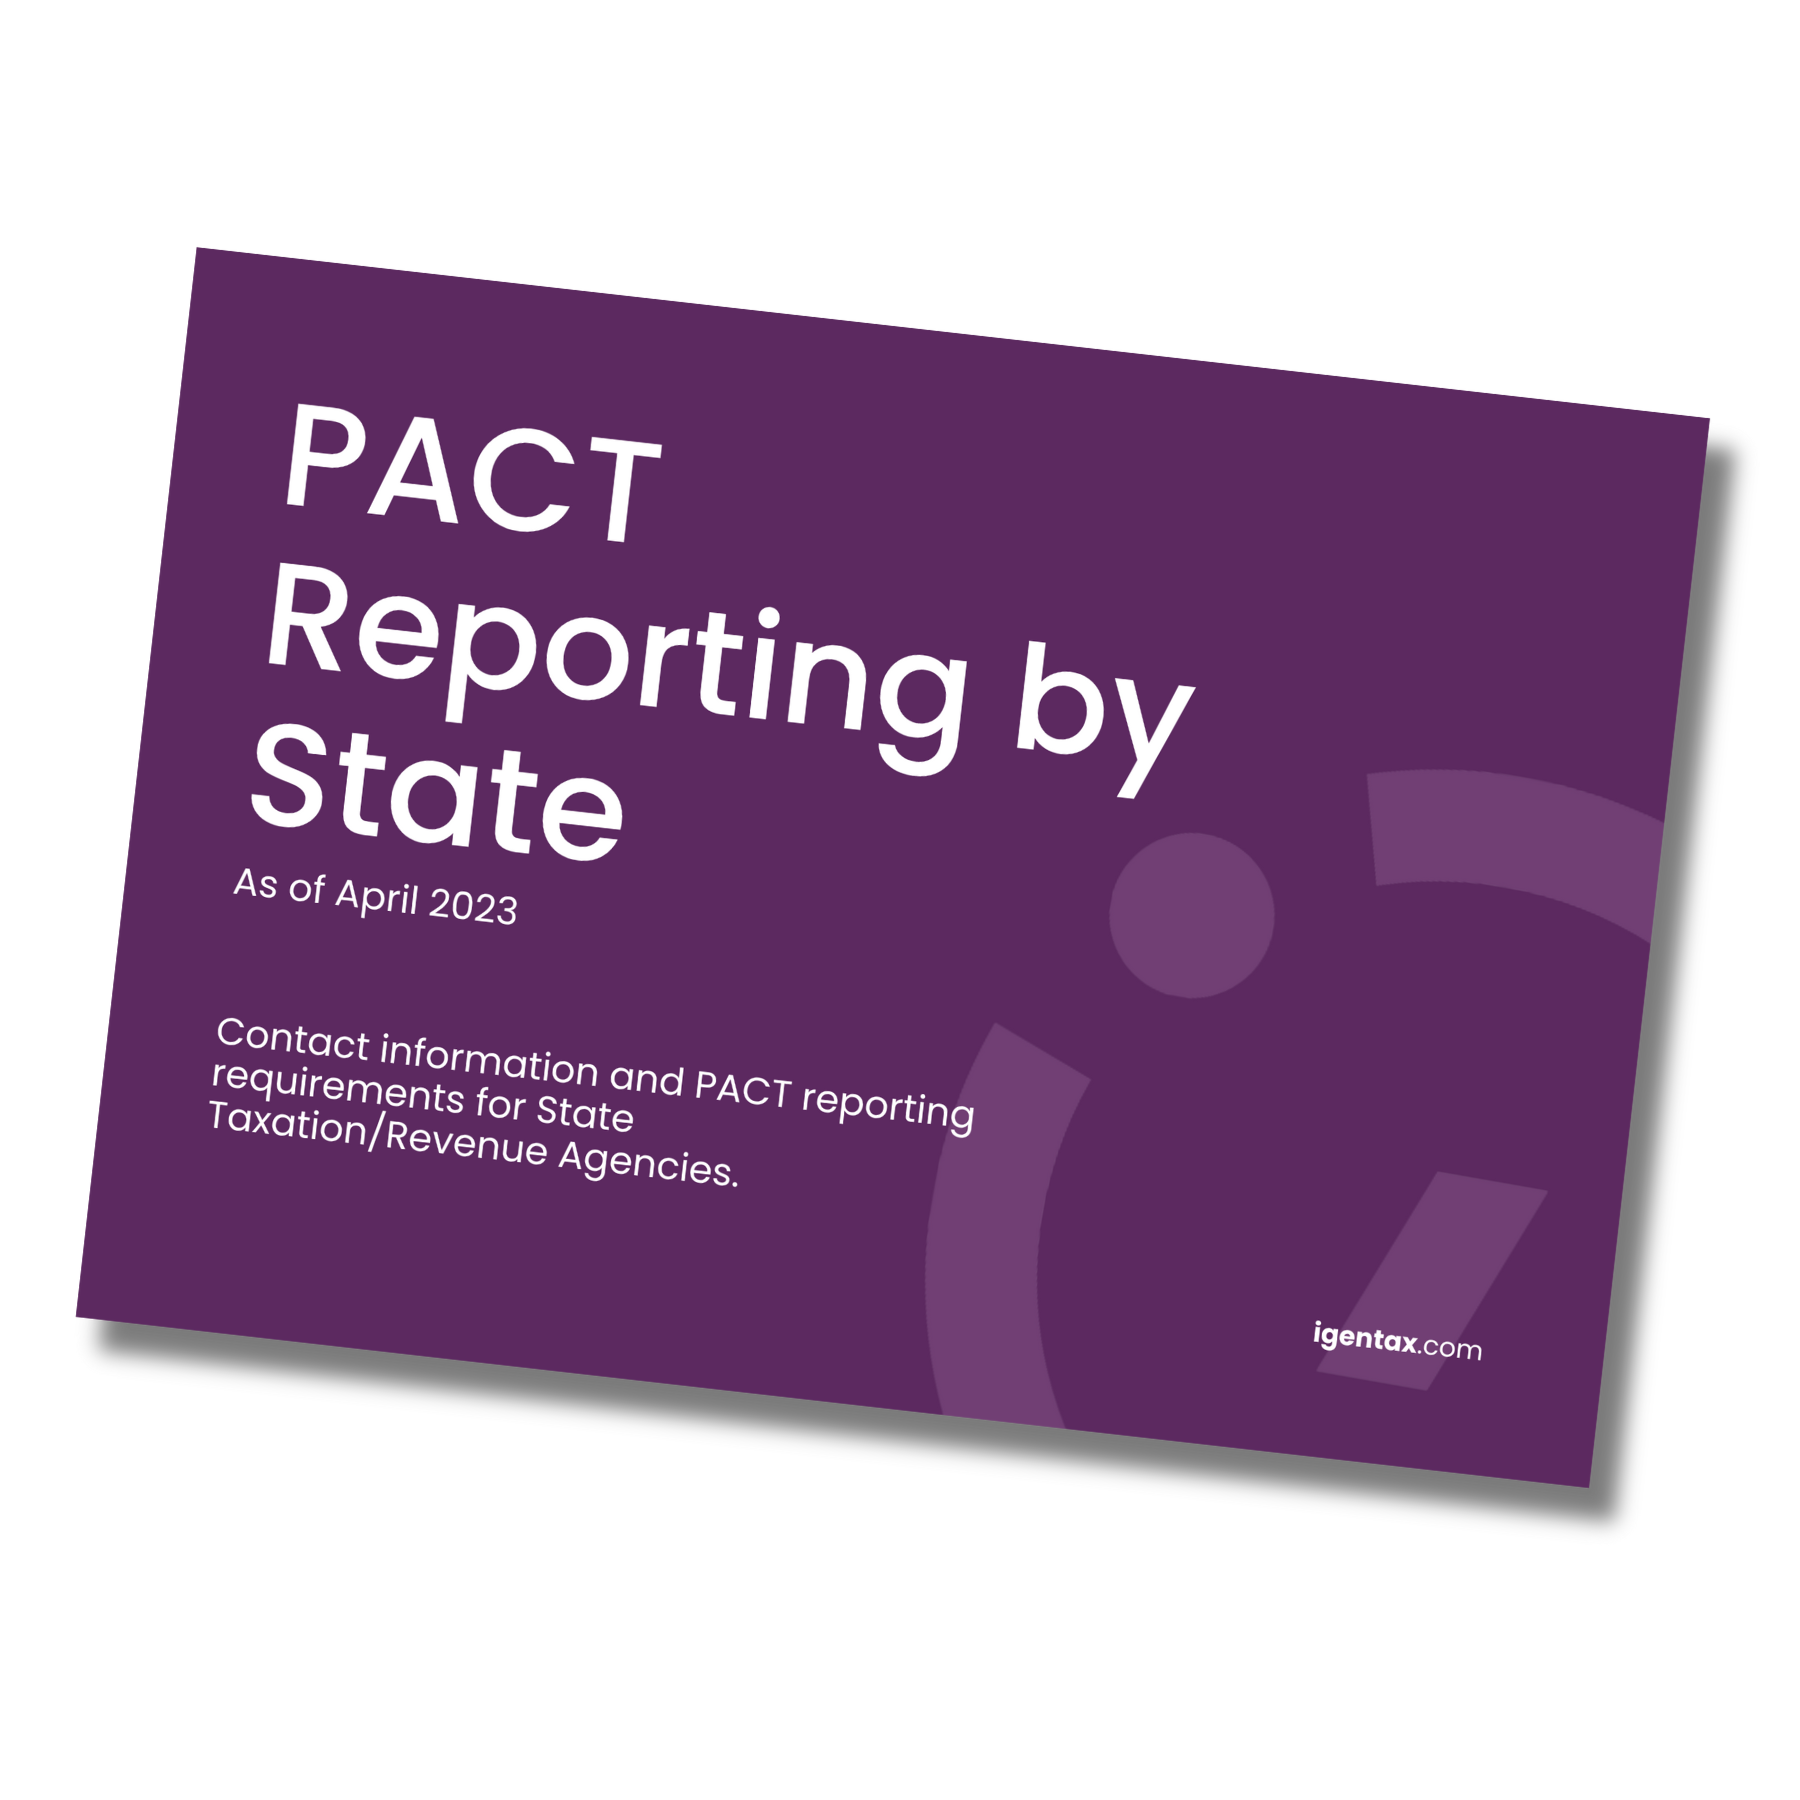 PACT reporting by state